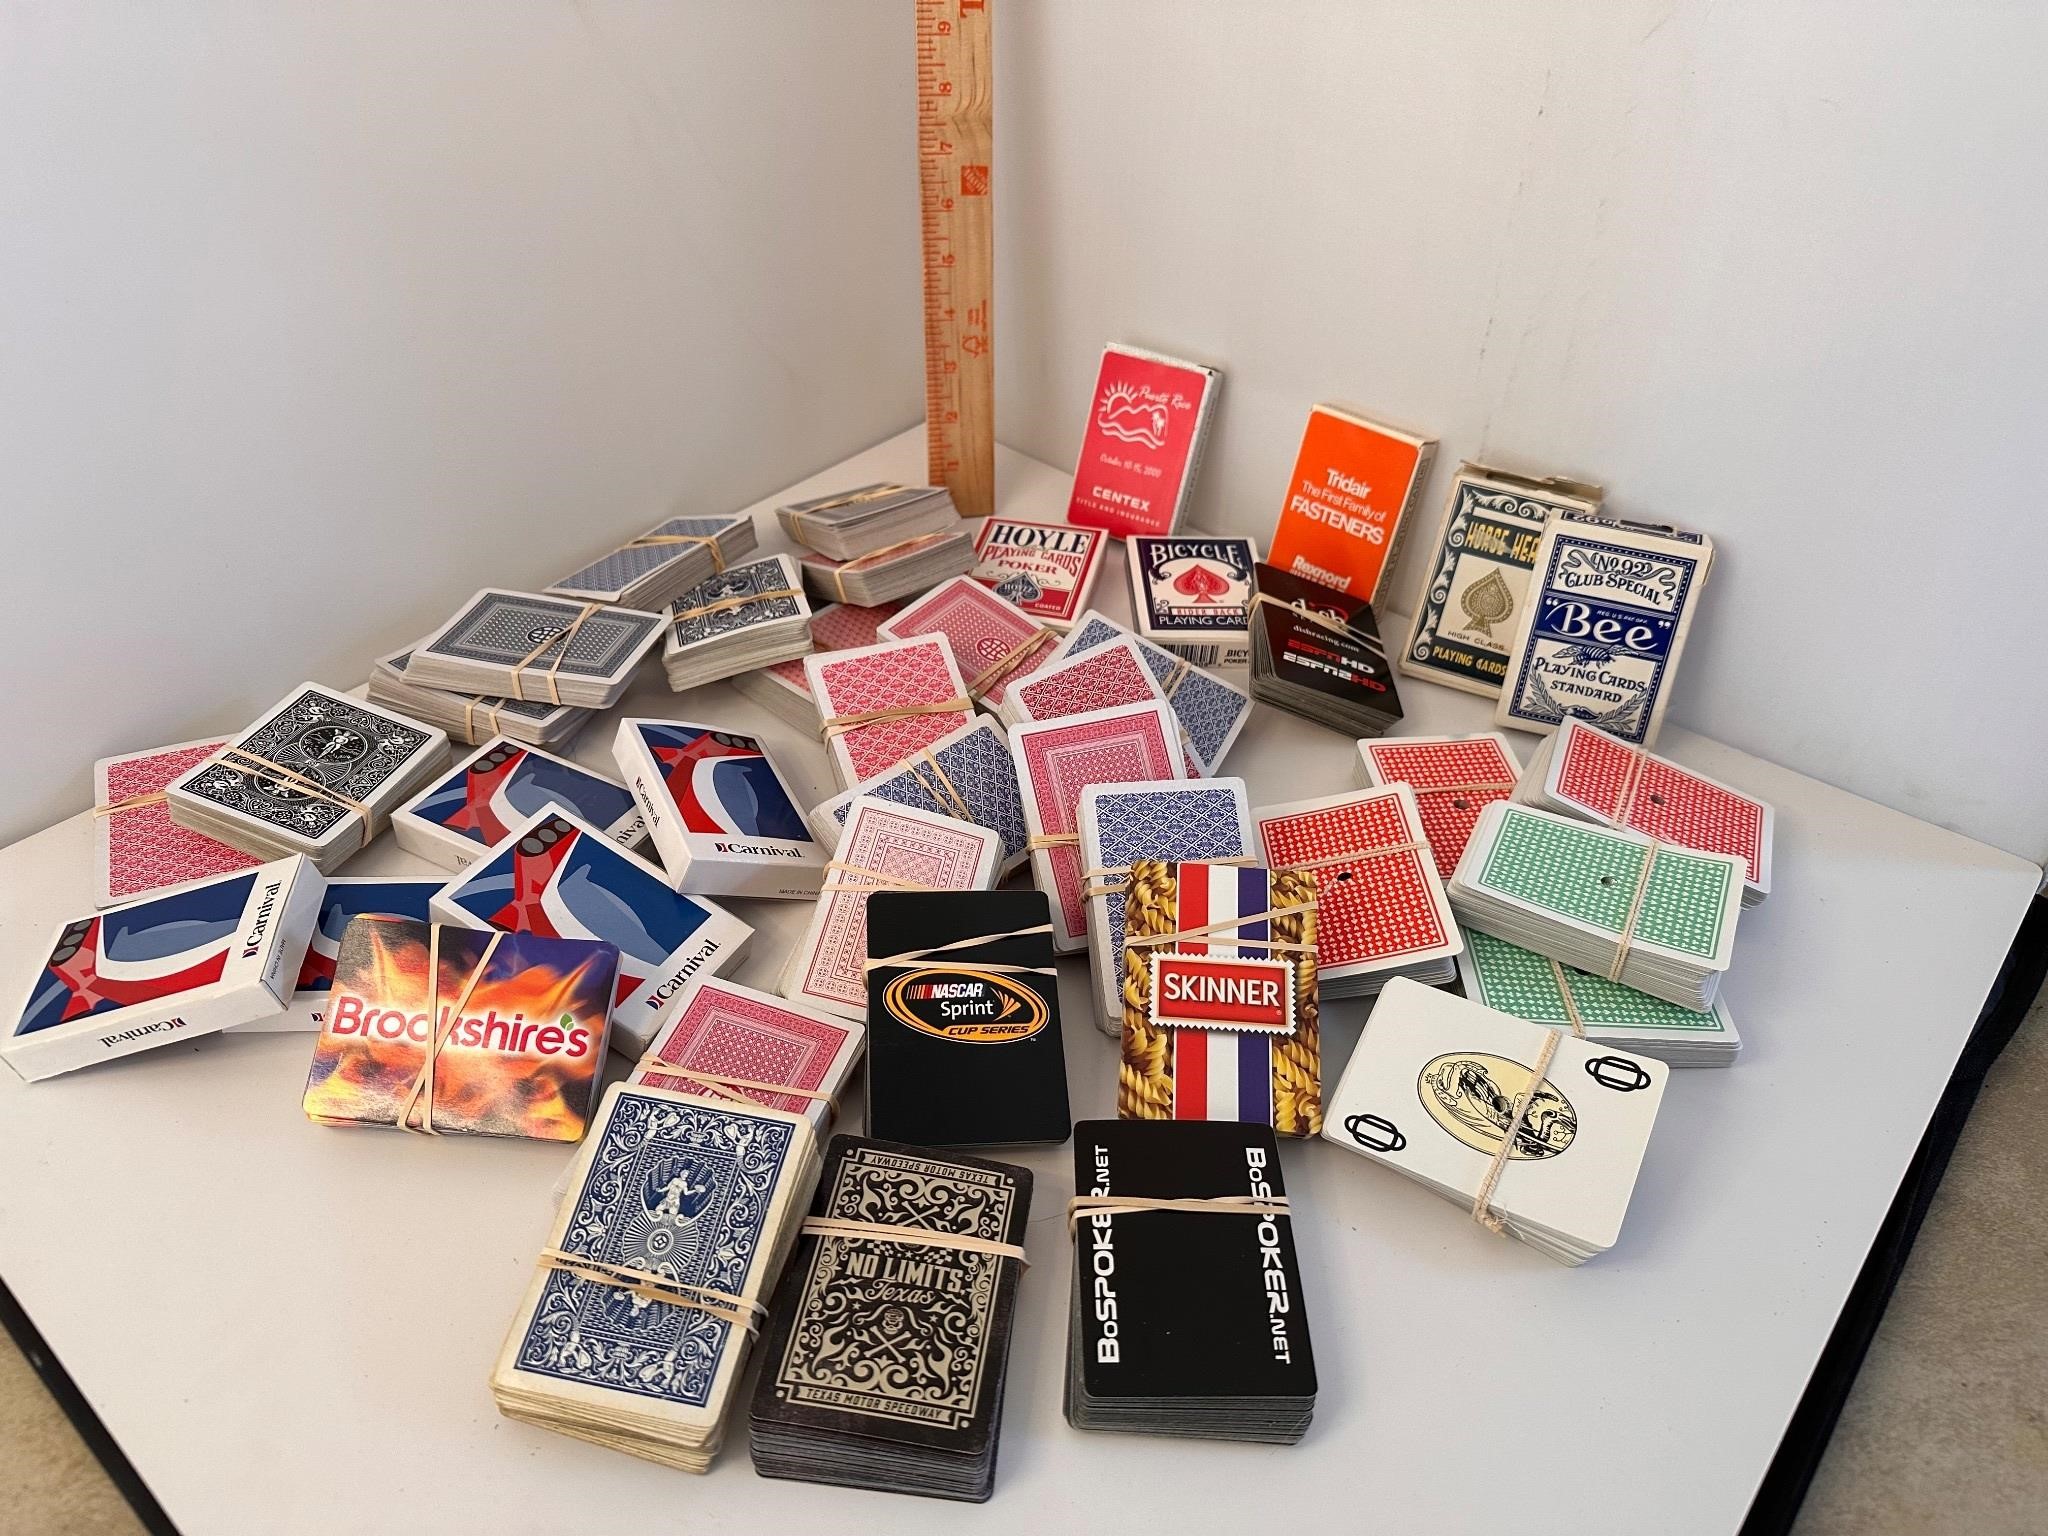 Large lot of vintage playing cards